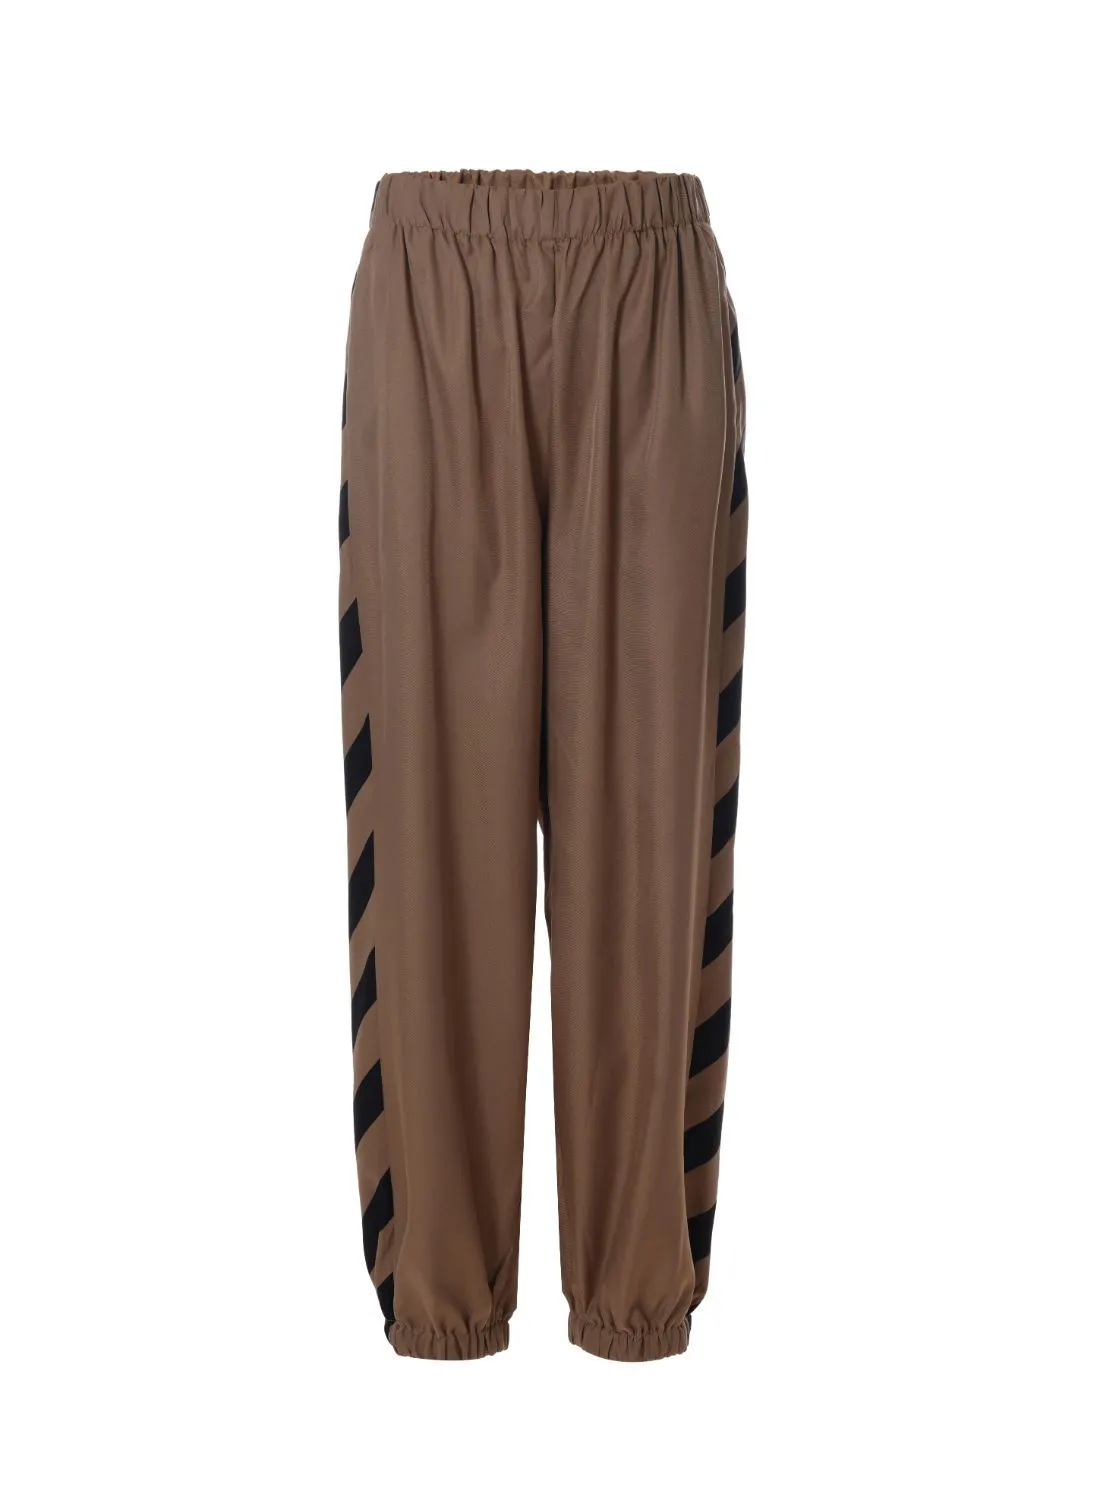 QUWA Trendy Casual Joggers with Elasticated waist and bottom with Contrast Side Stripes Khaki